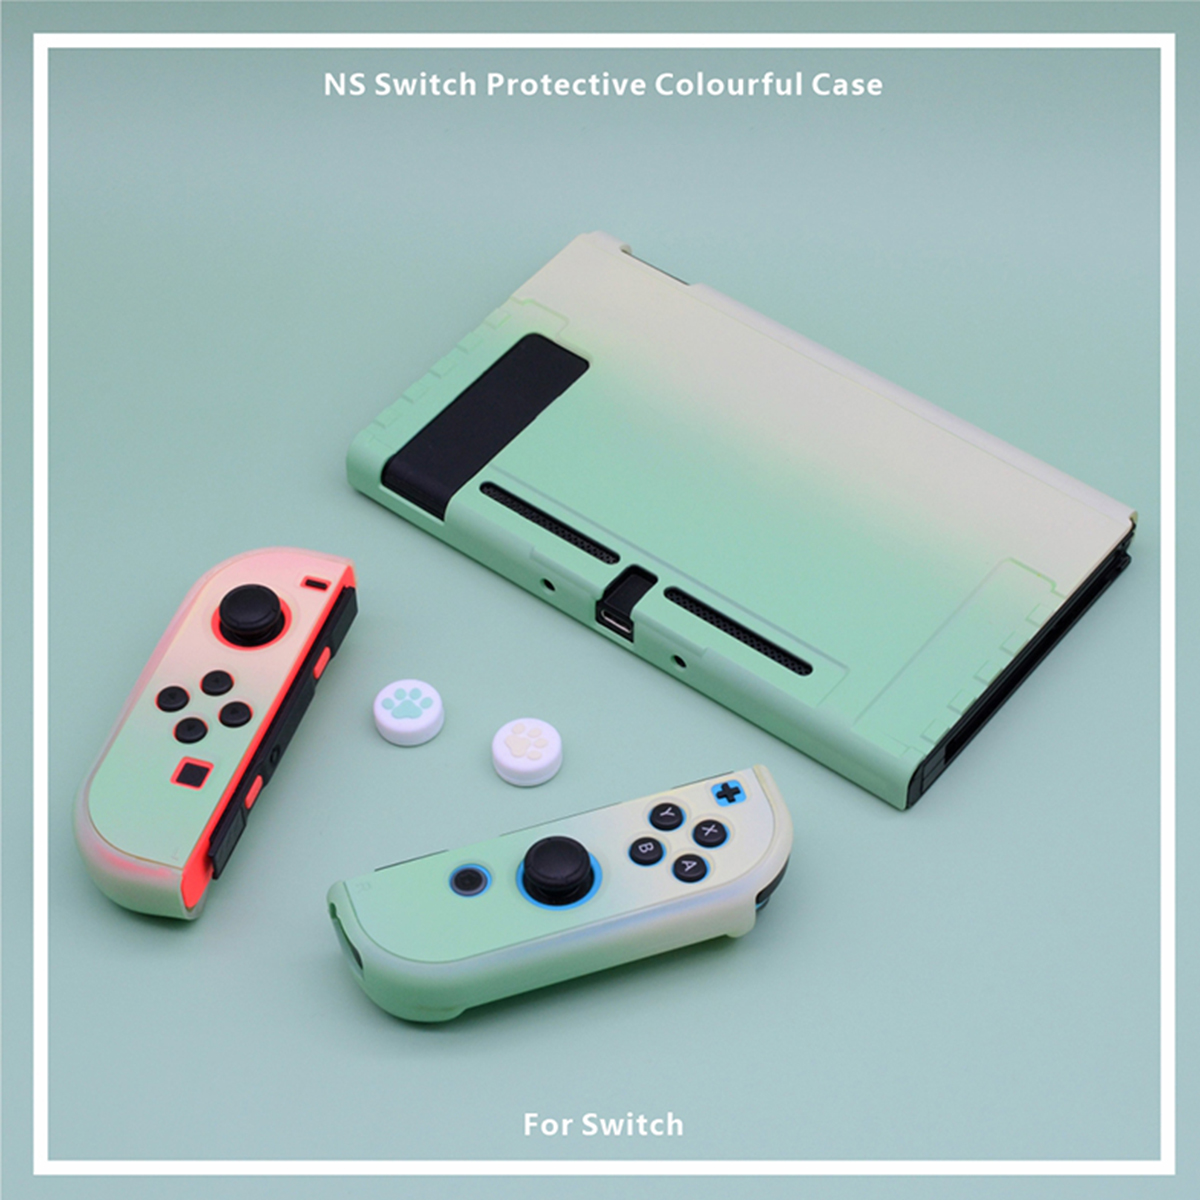 Colorful-Shockproof-Shell-Gradient-Case-Protector-for-Nintendo-Switch-Game-Console-Protective-Hard-C-1737853-3